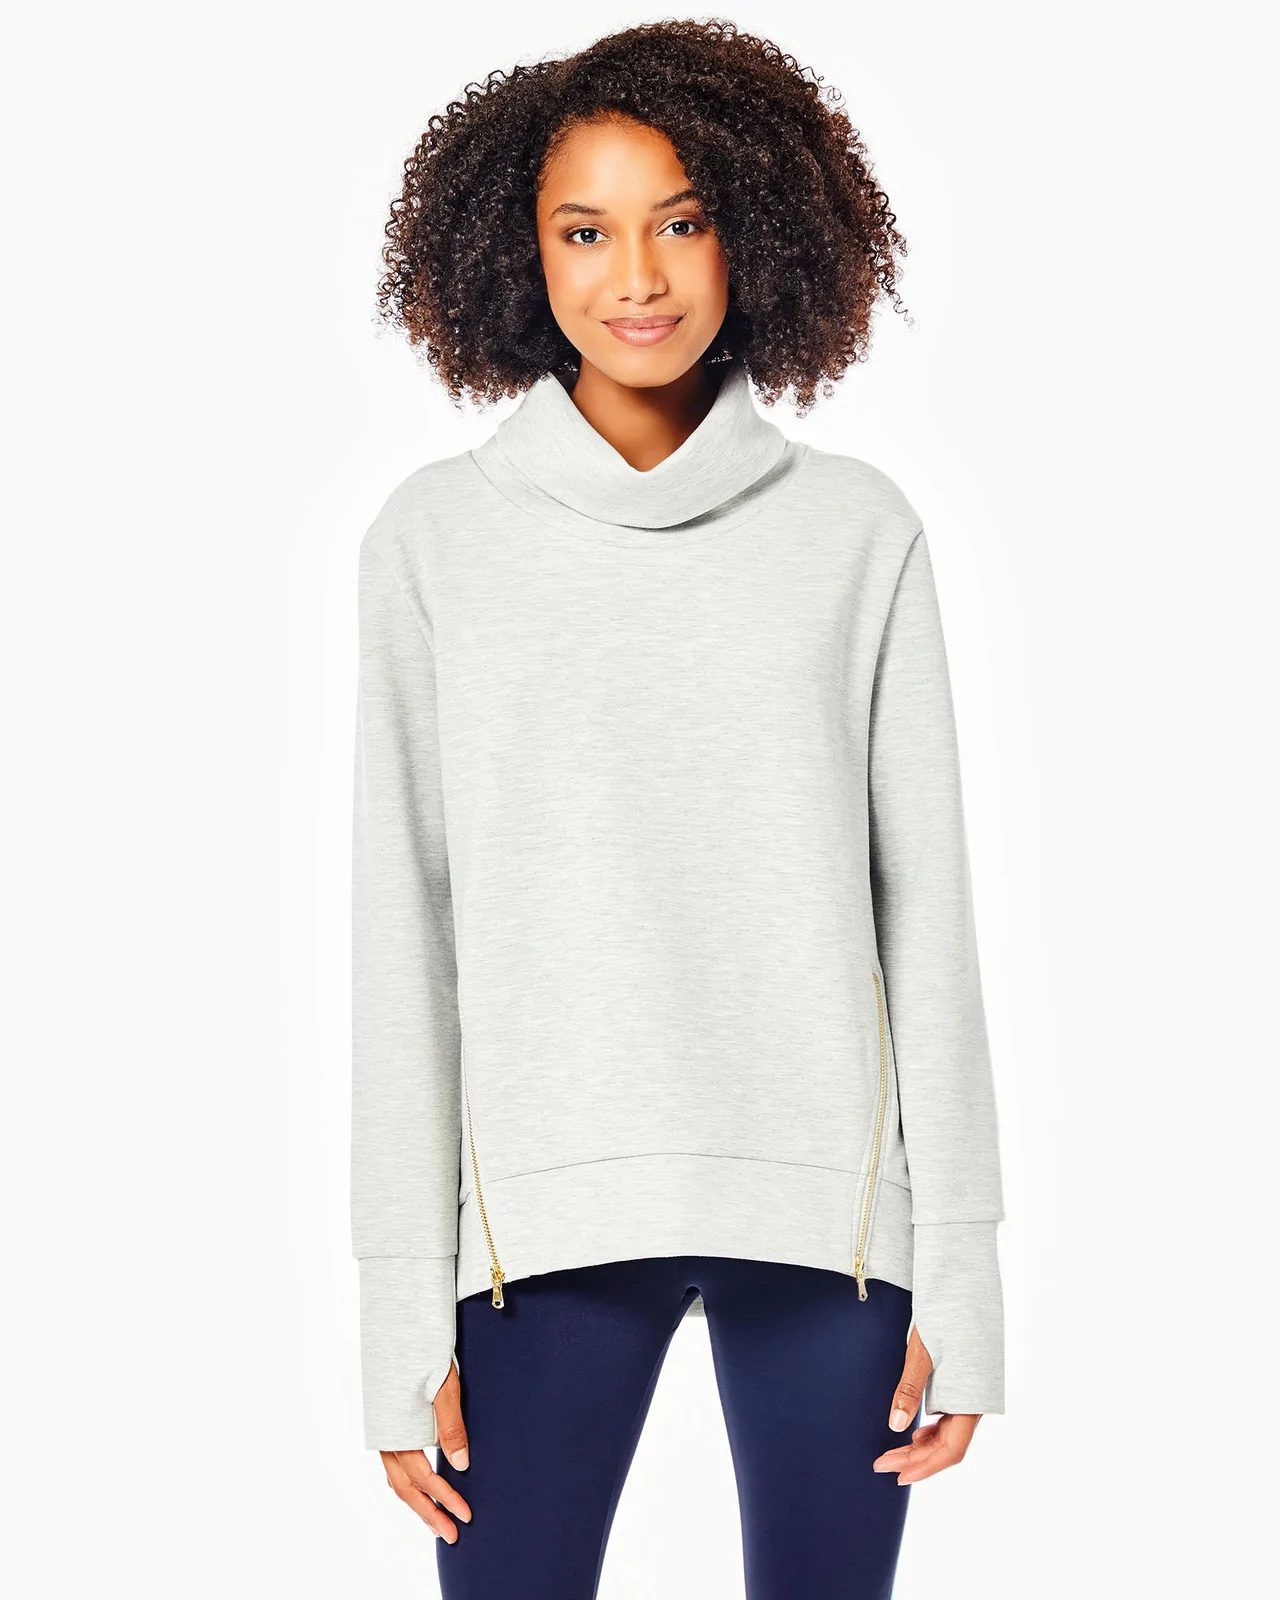 Everyday Pullover from Addison Bay